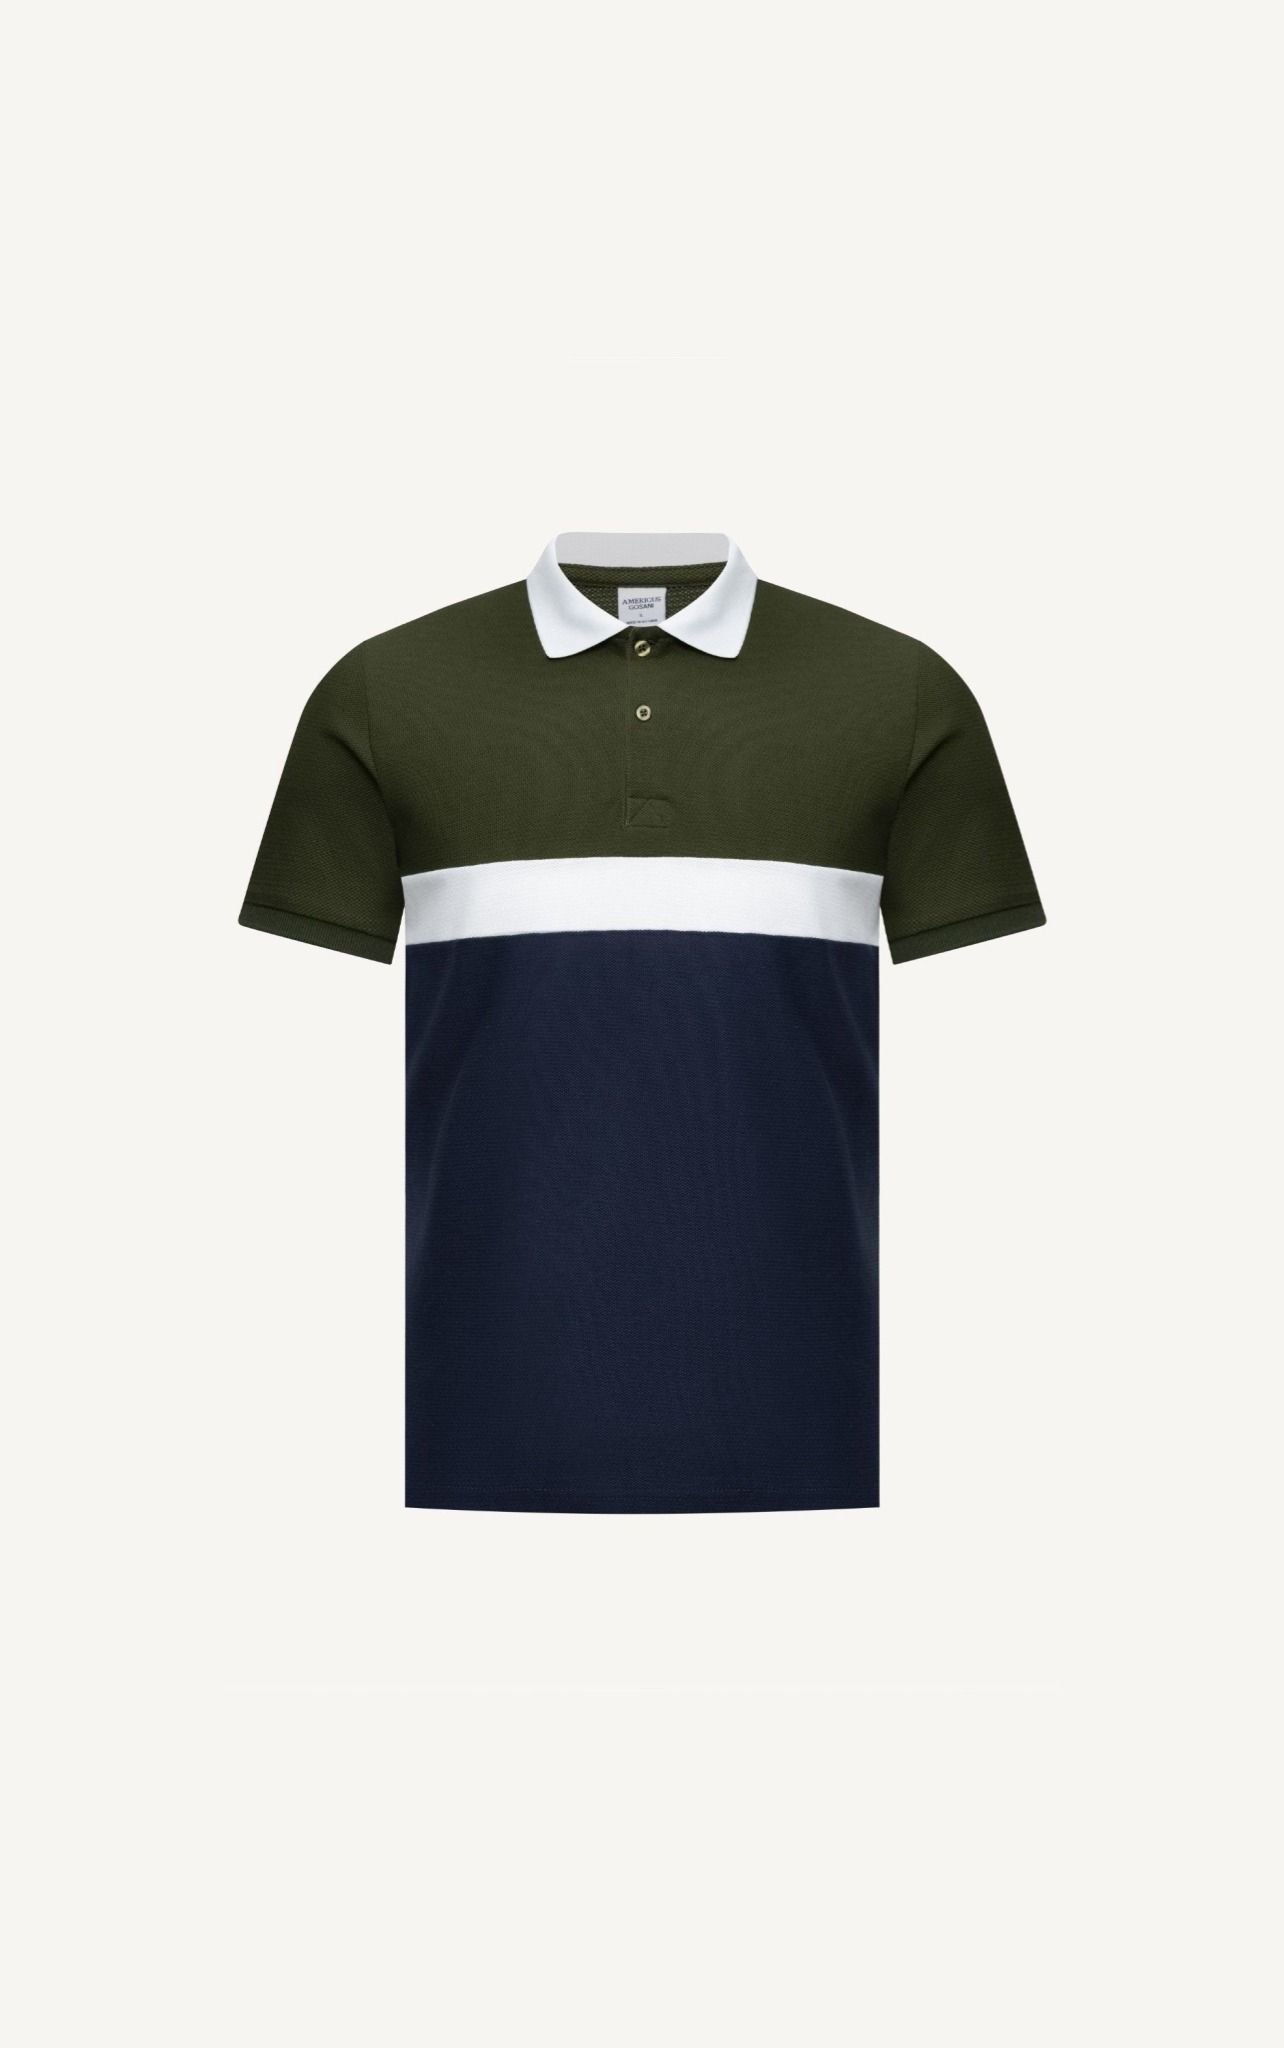  T53 FACTORY SLIMFIT COLOR STRIPED POLO - GREEN 